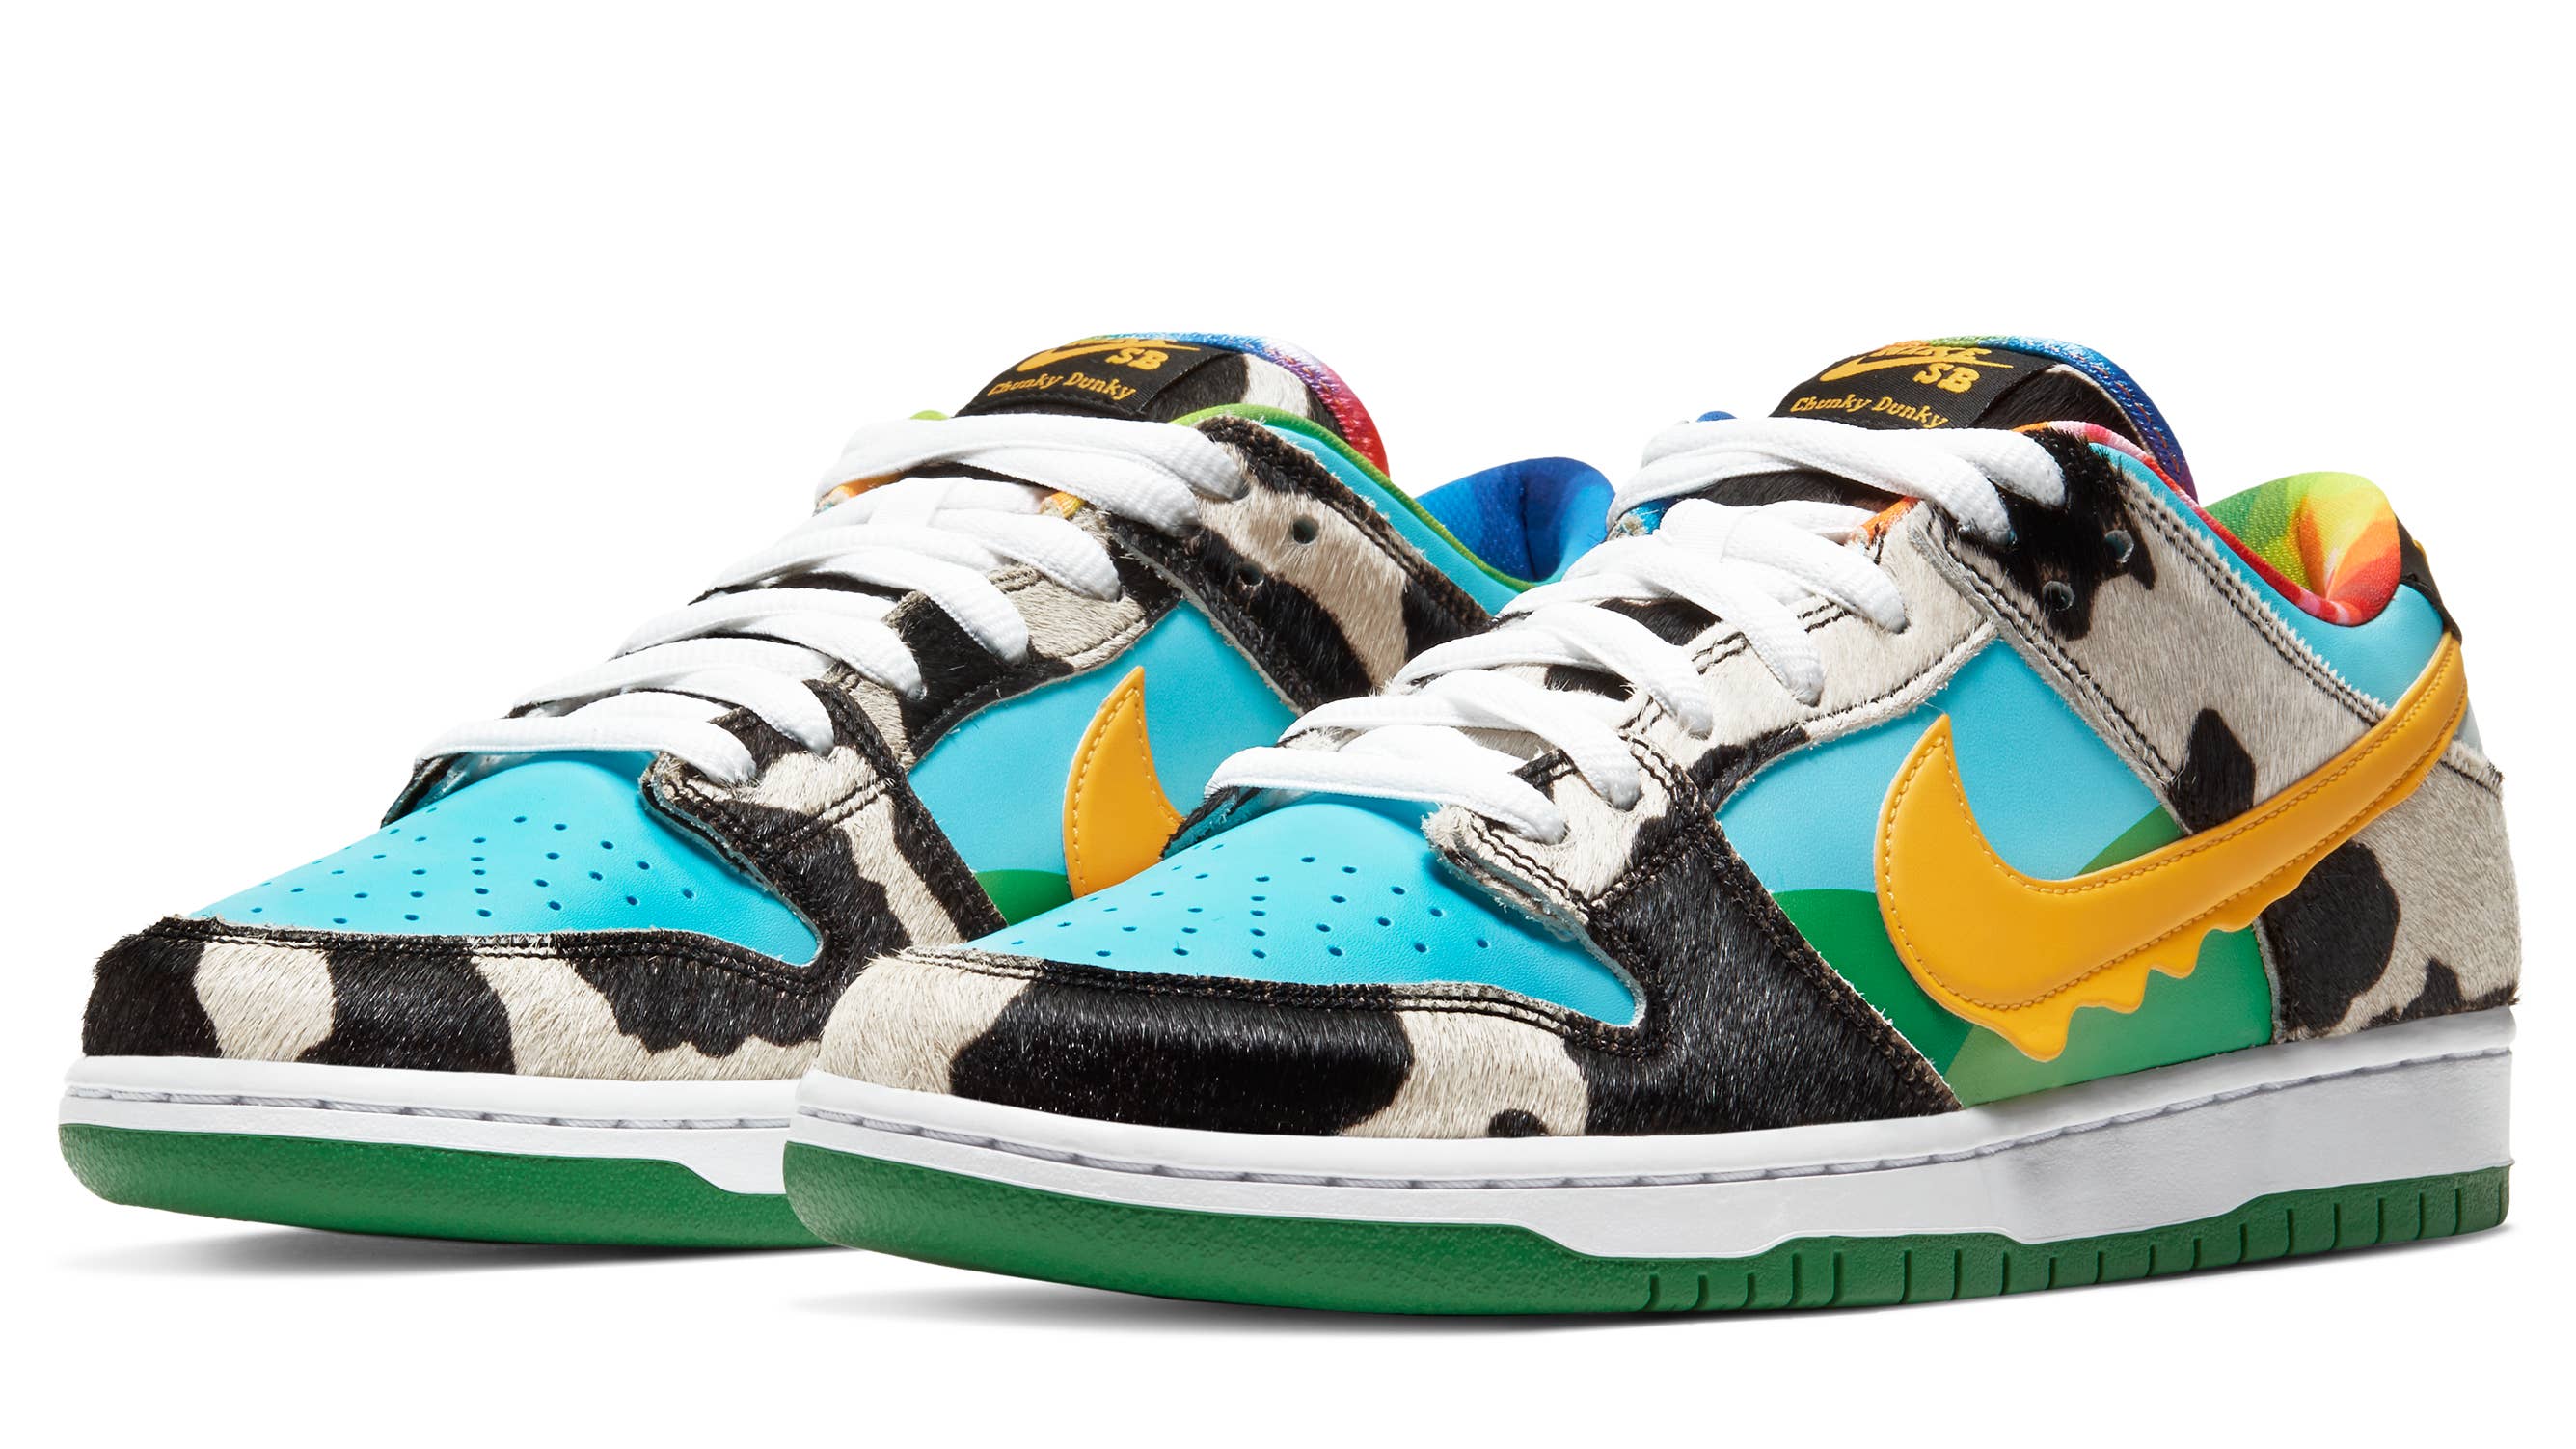 Ben and Jerry's x Nike SB Dunk Low 'Chunky Dunky' CU3244 100 (Pair)